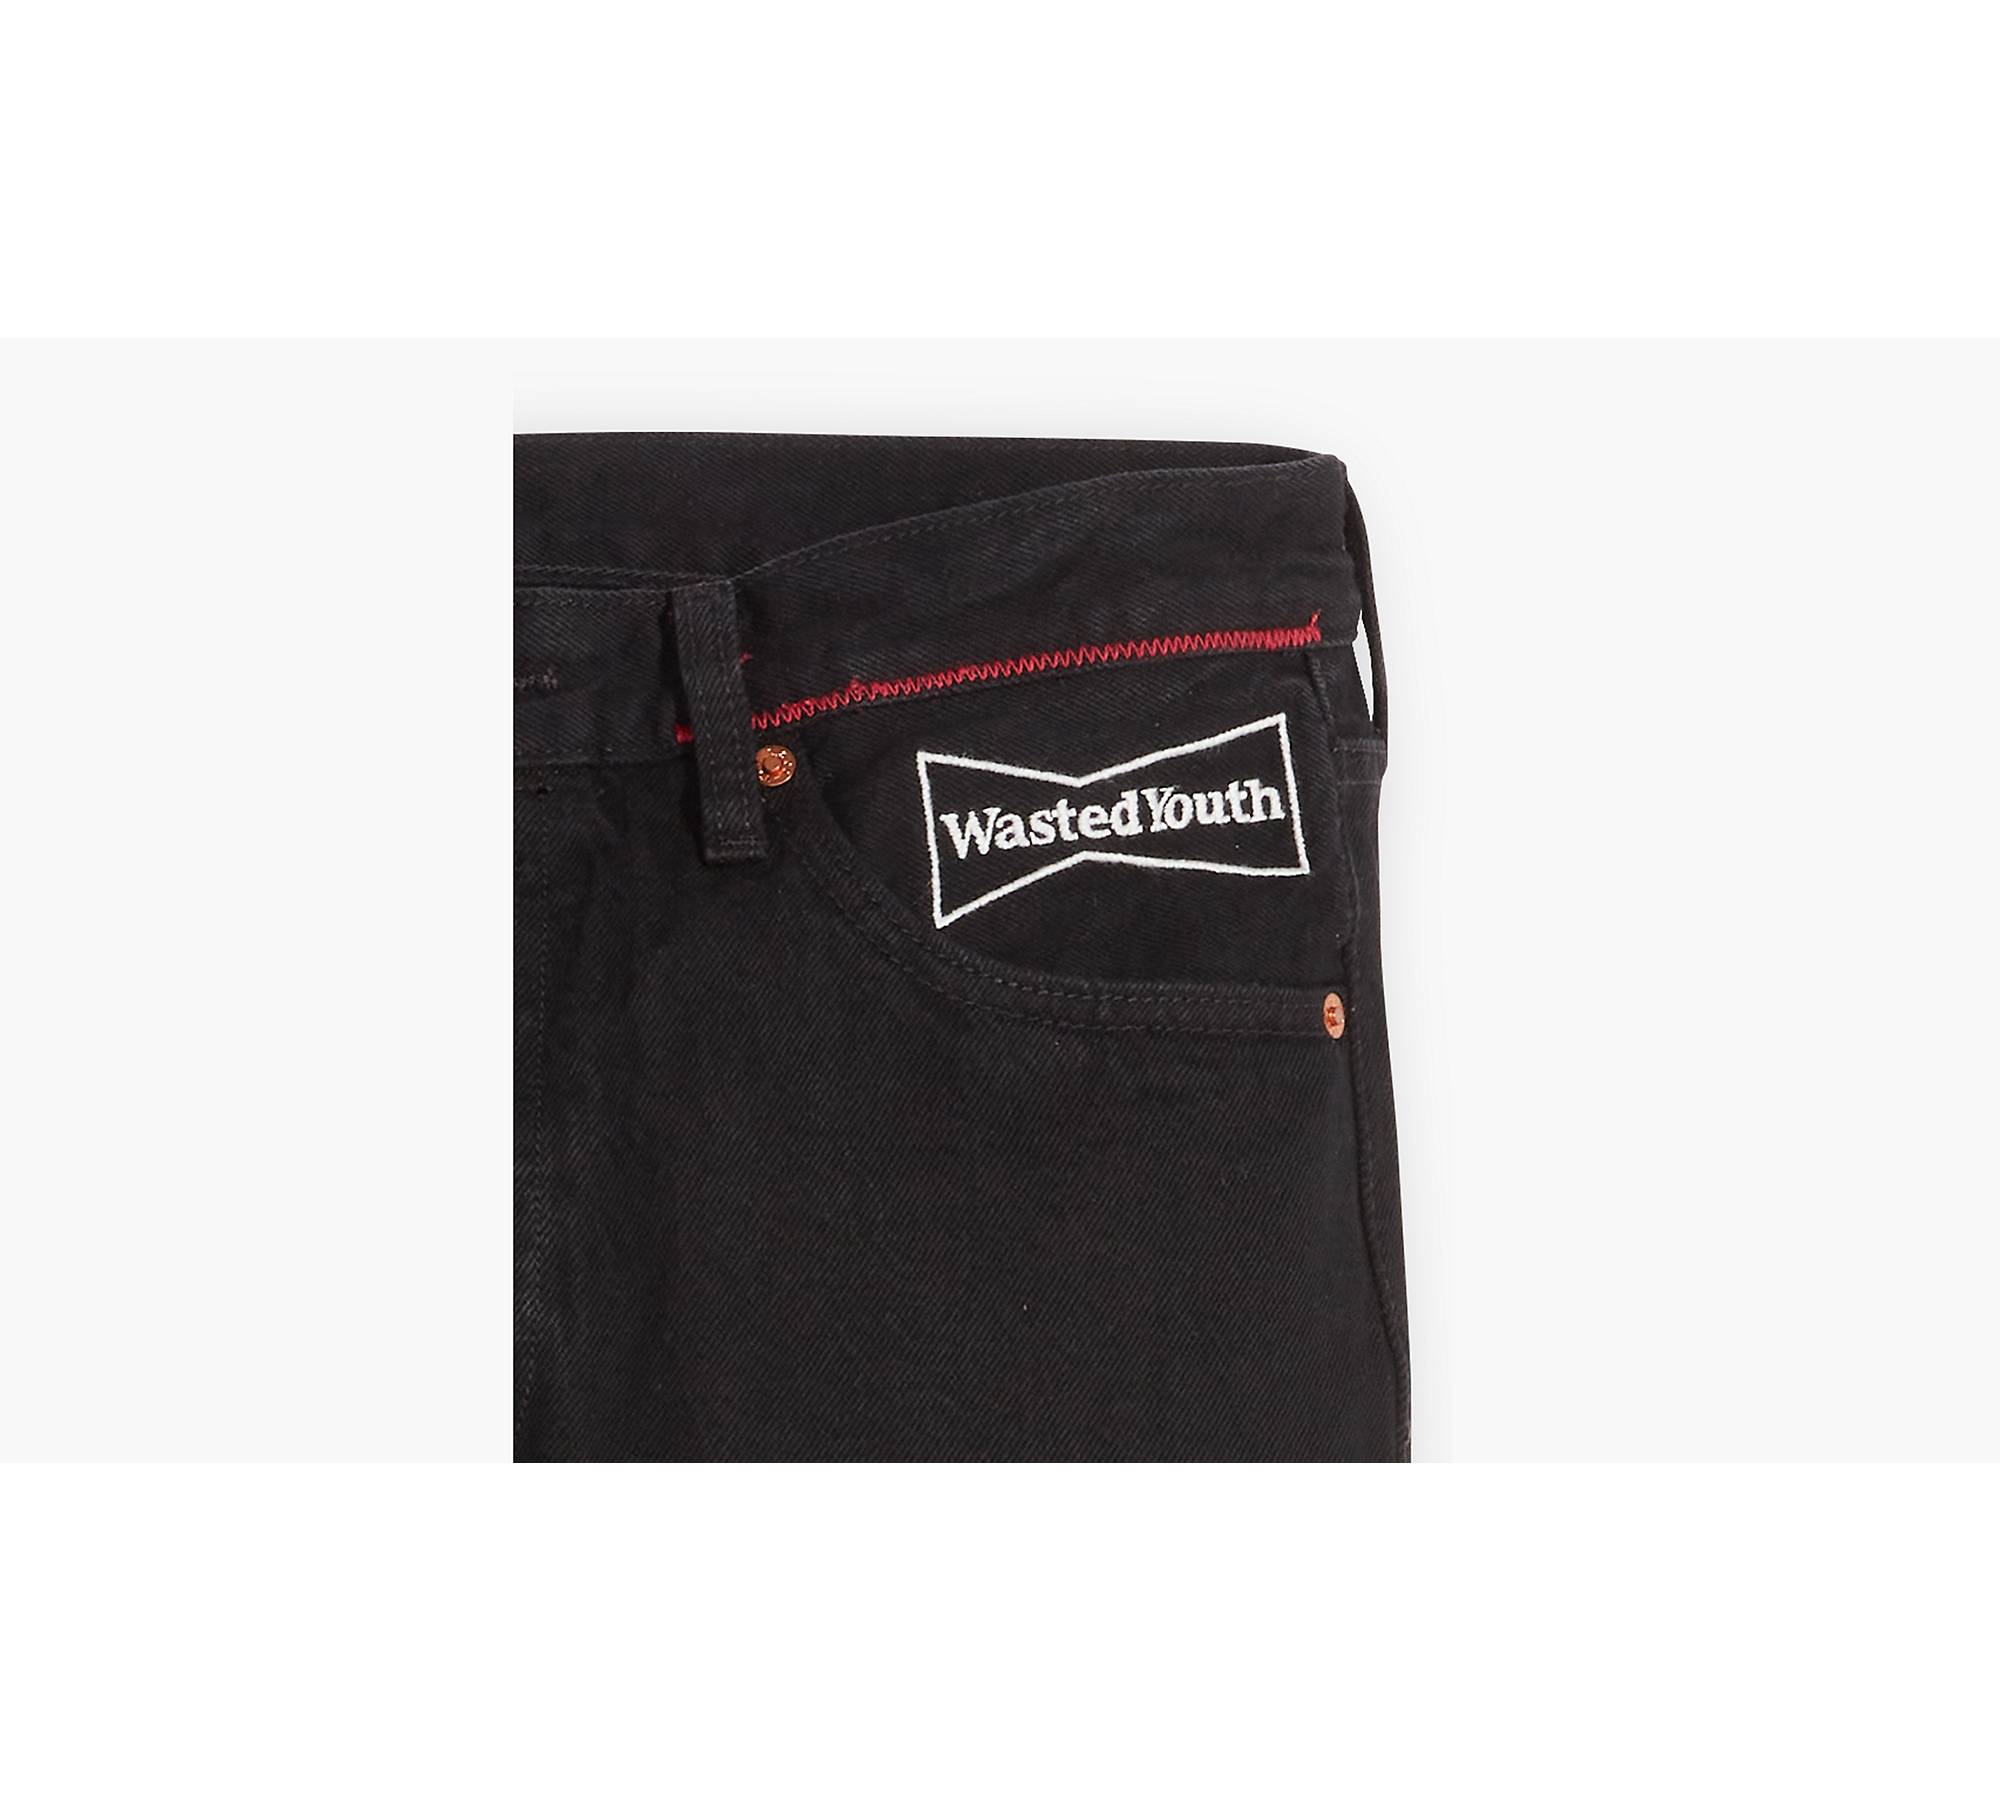 Jean 501® '93 Original Levi's® x verdy Wasted Youth - Noir